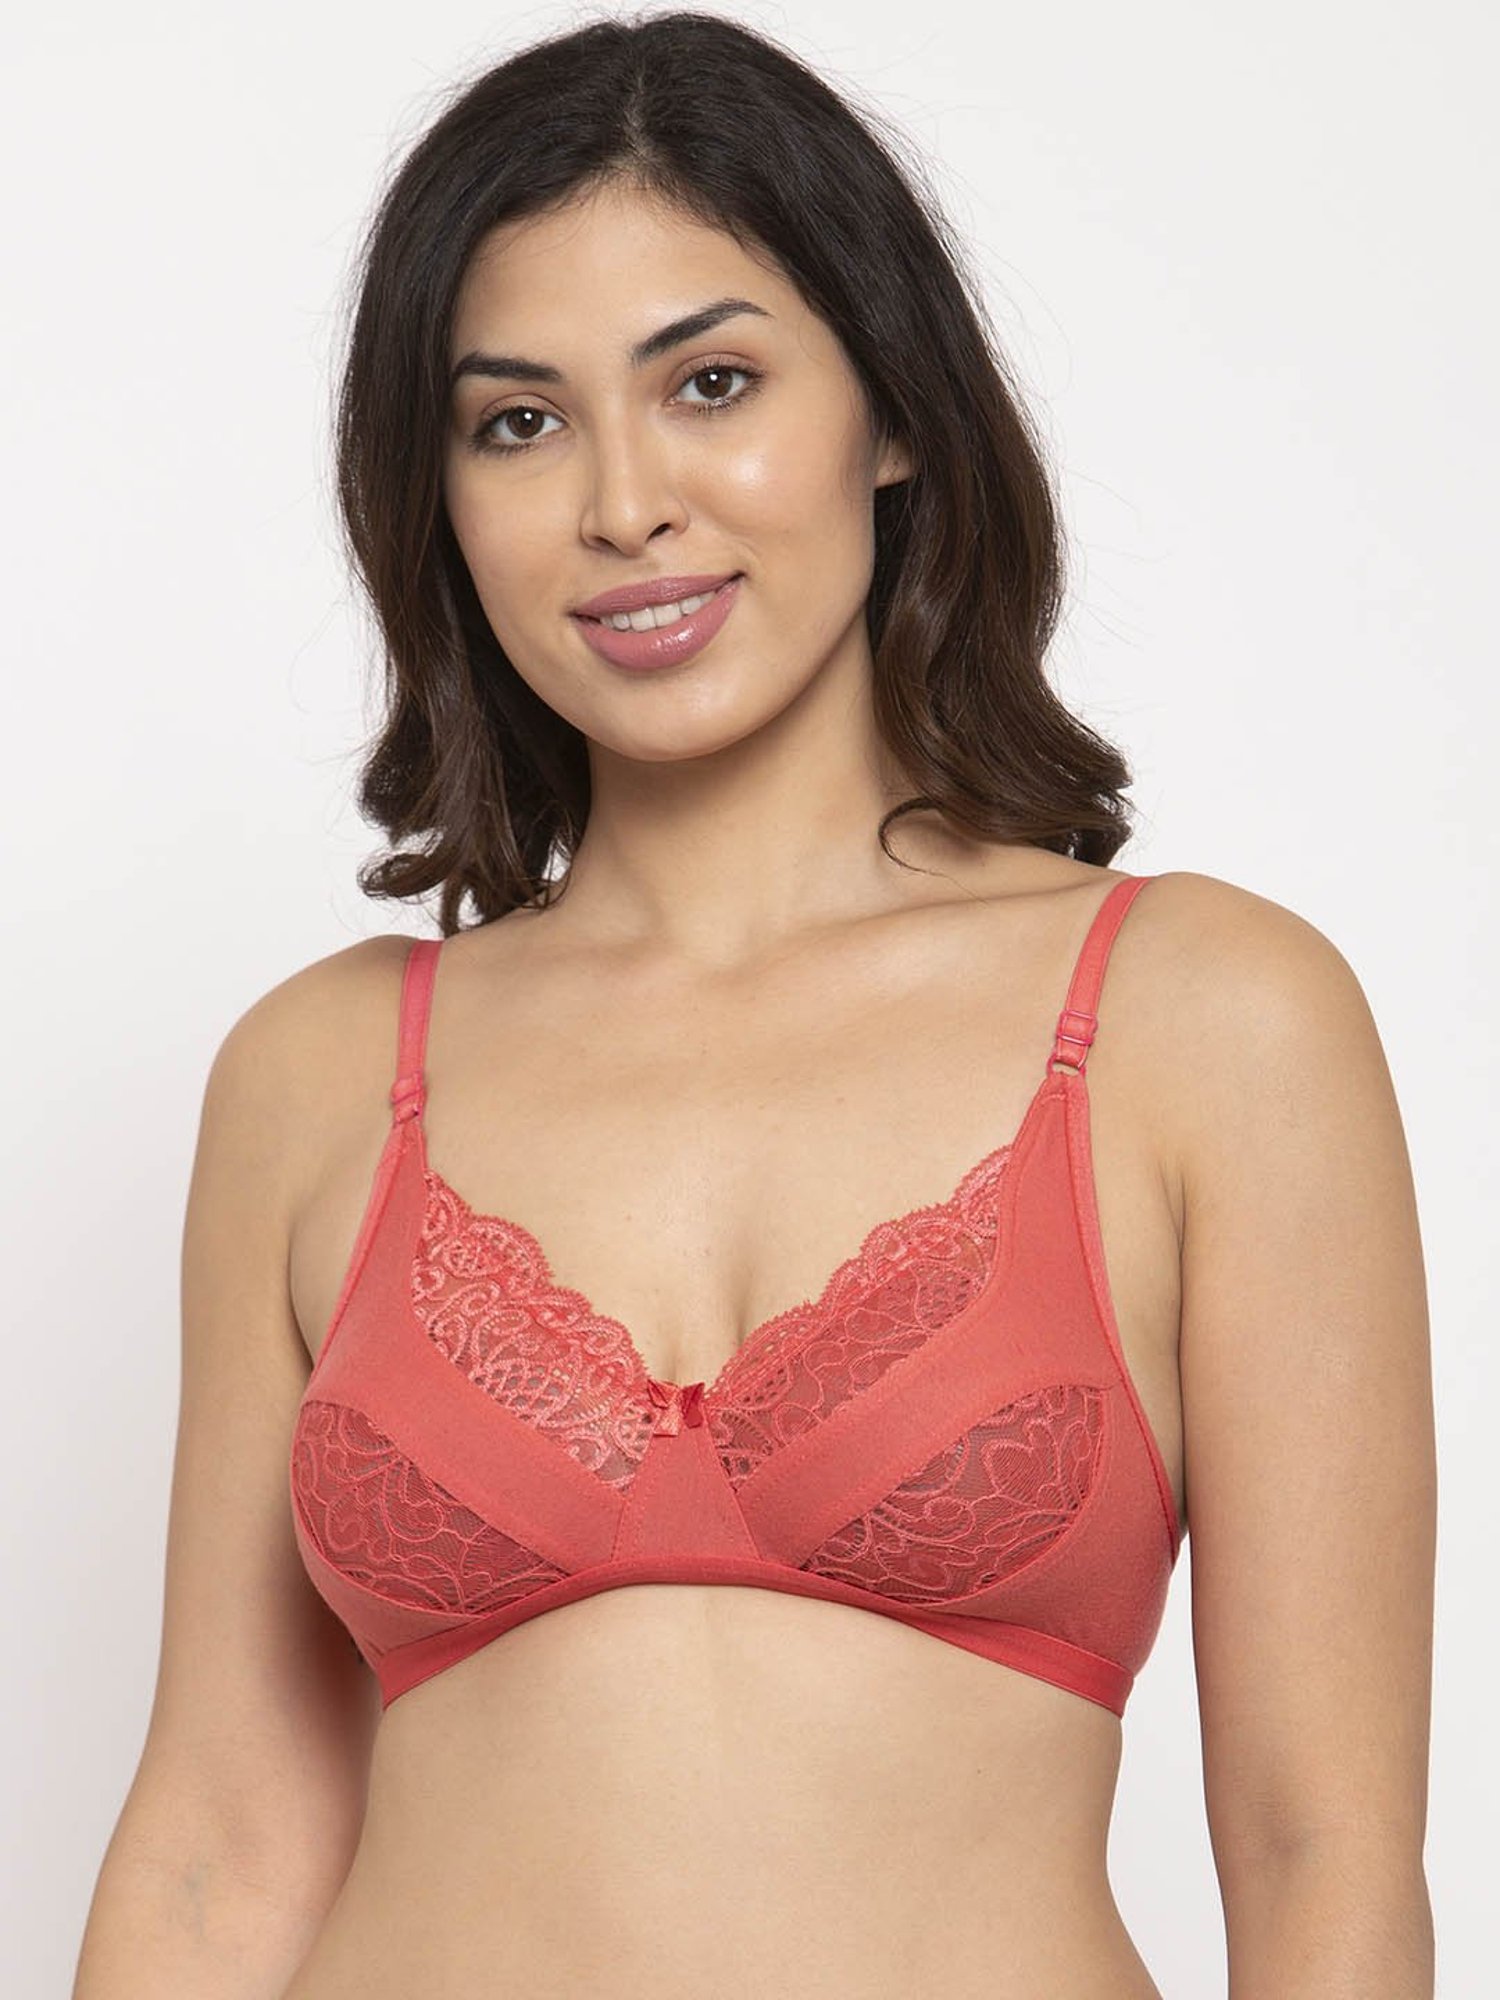 Innocence Women's Non Padded Non wired Printed Bra